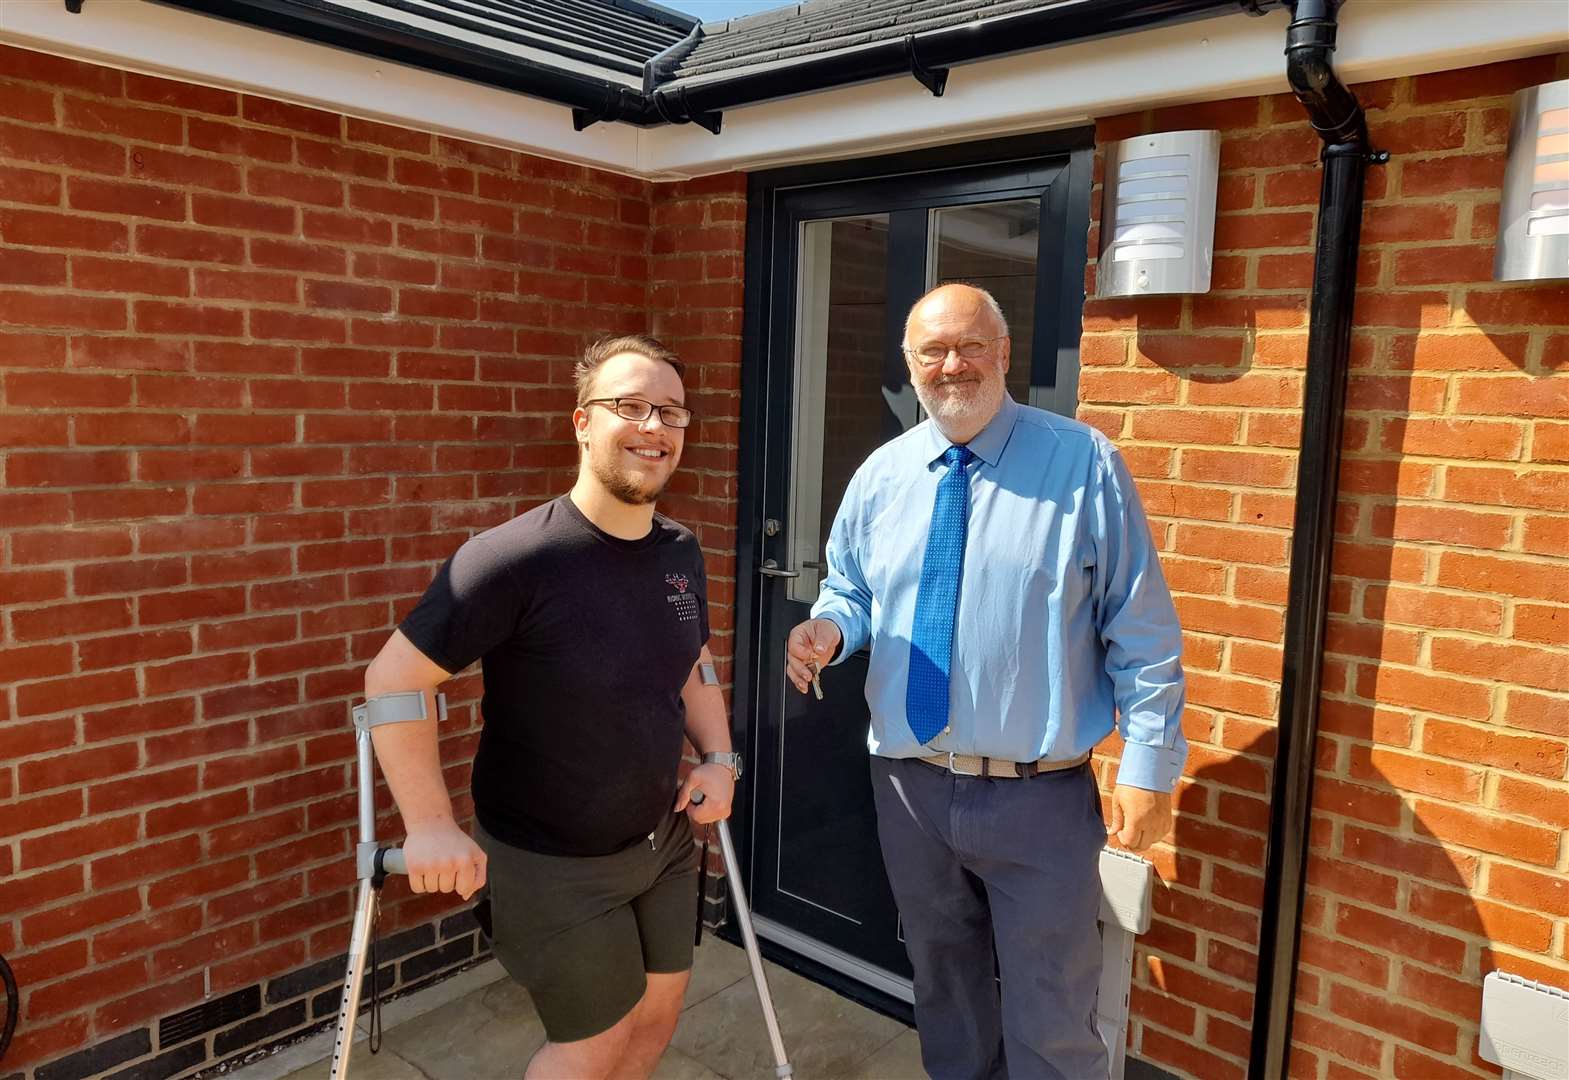 Council Homes In Dartford Completed For People With Additional Needs As